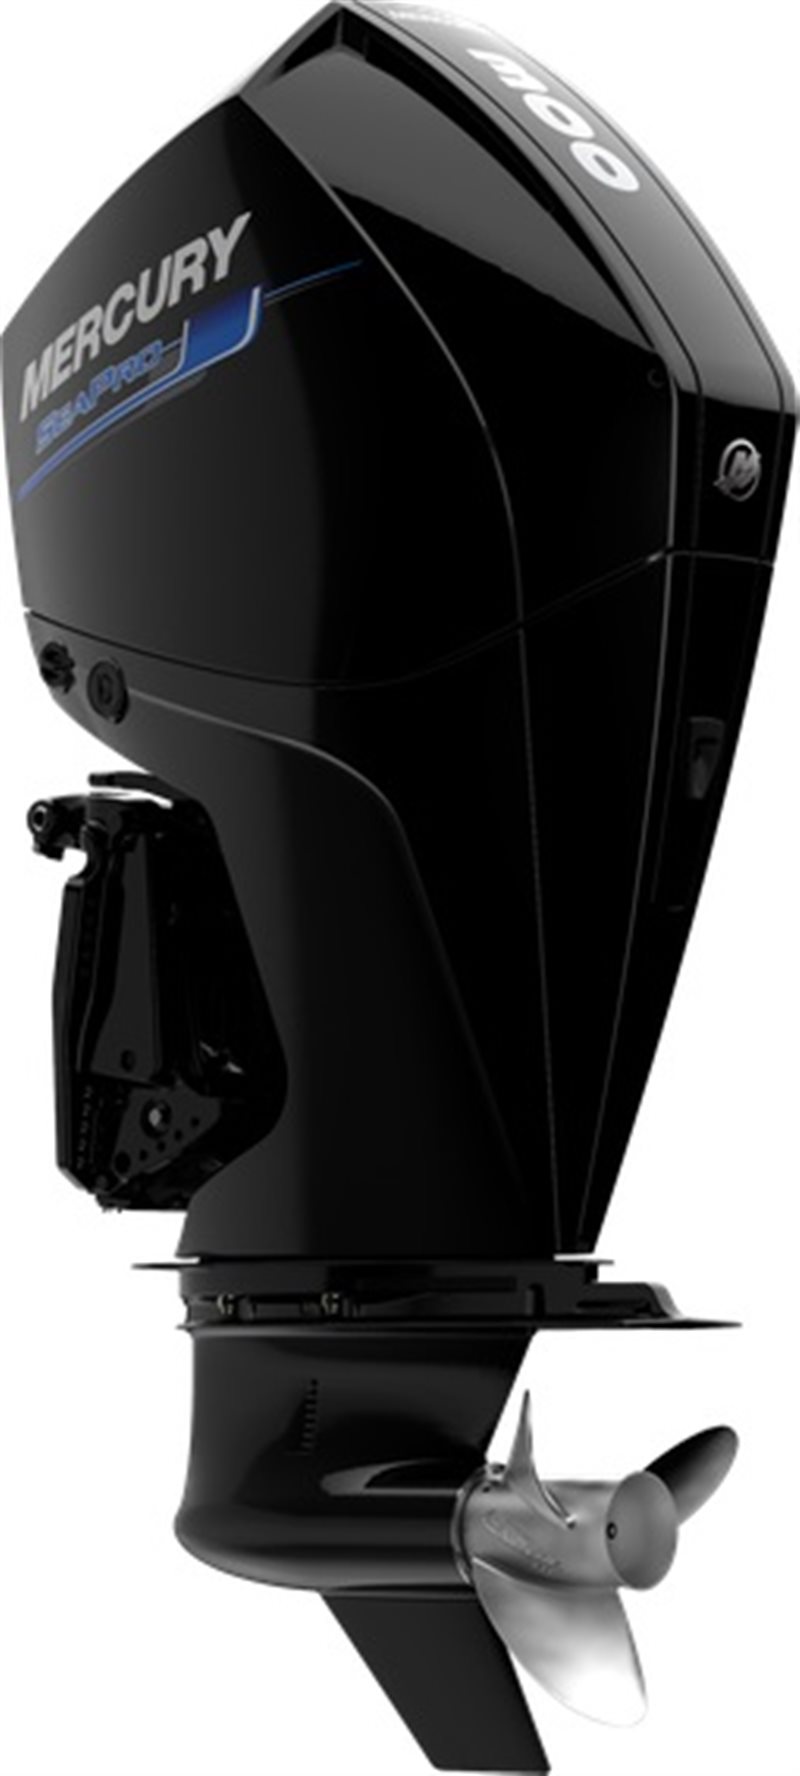 2021 Mercury Outboard SeaPro 200 - 300 SeaPro 300 CMS at DT Powersports & Marine